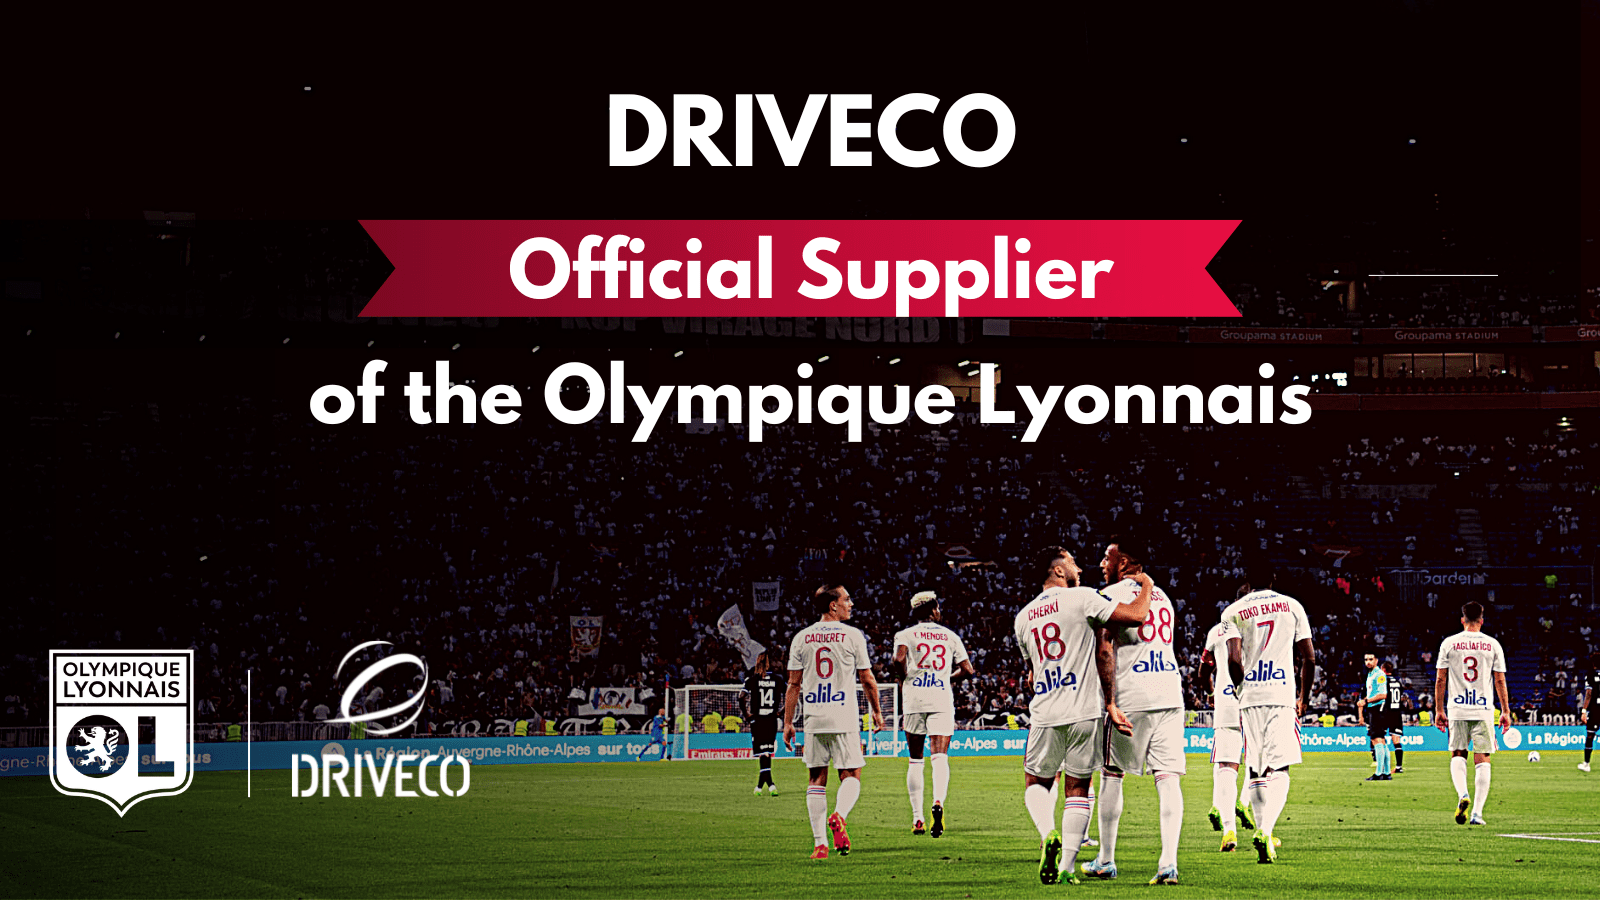 Driveco becomes Official Supplier to Olympique Lyonnais until 2025